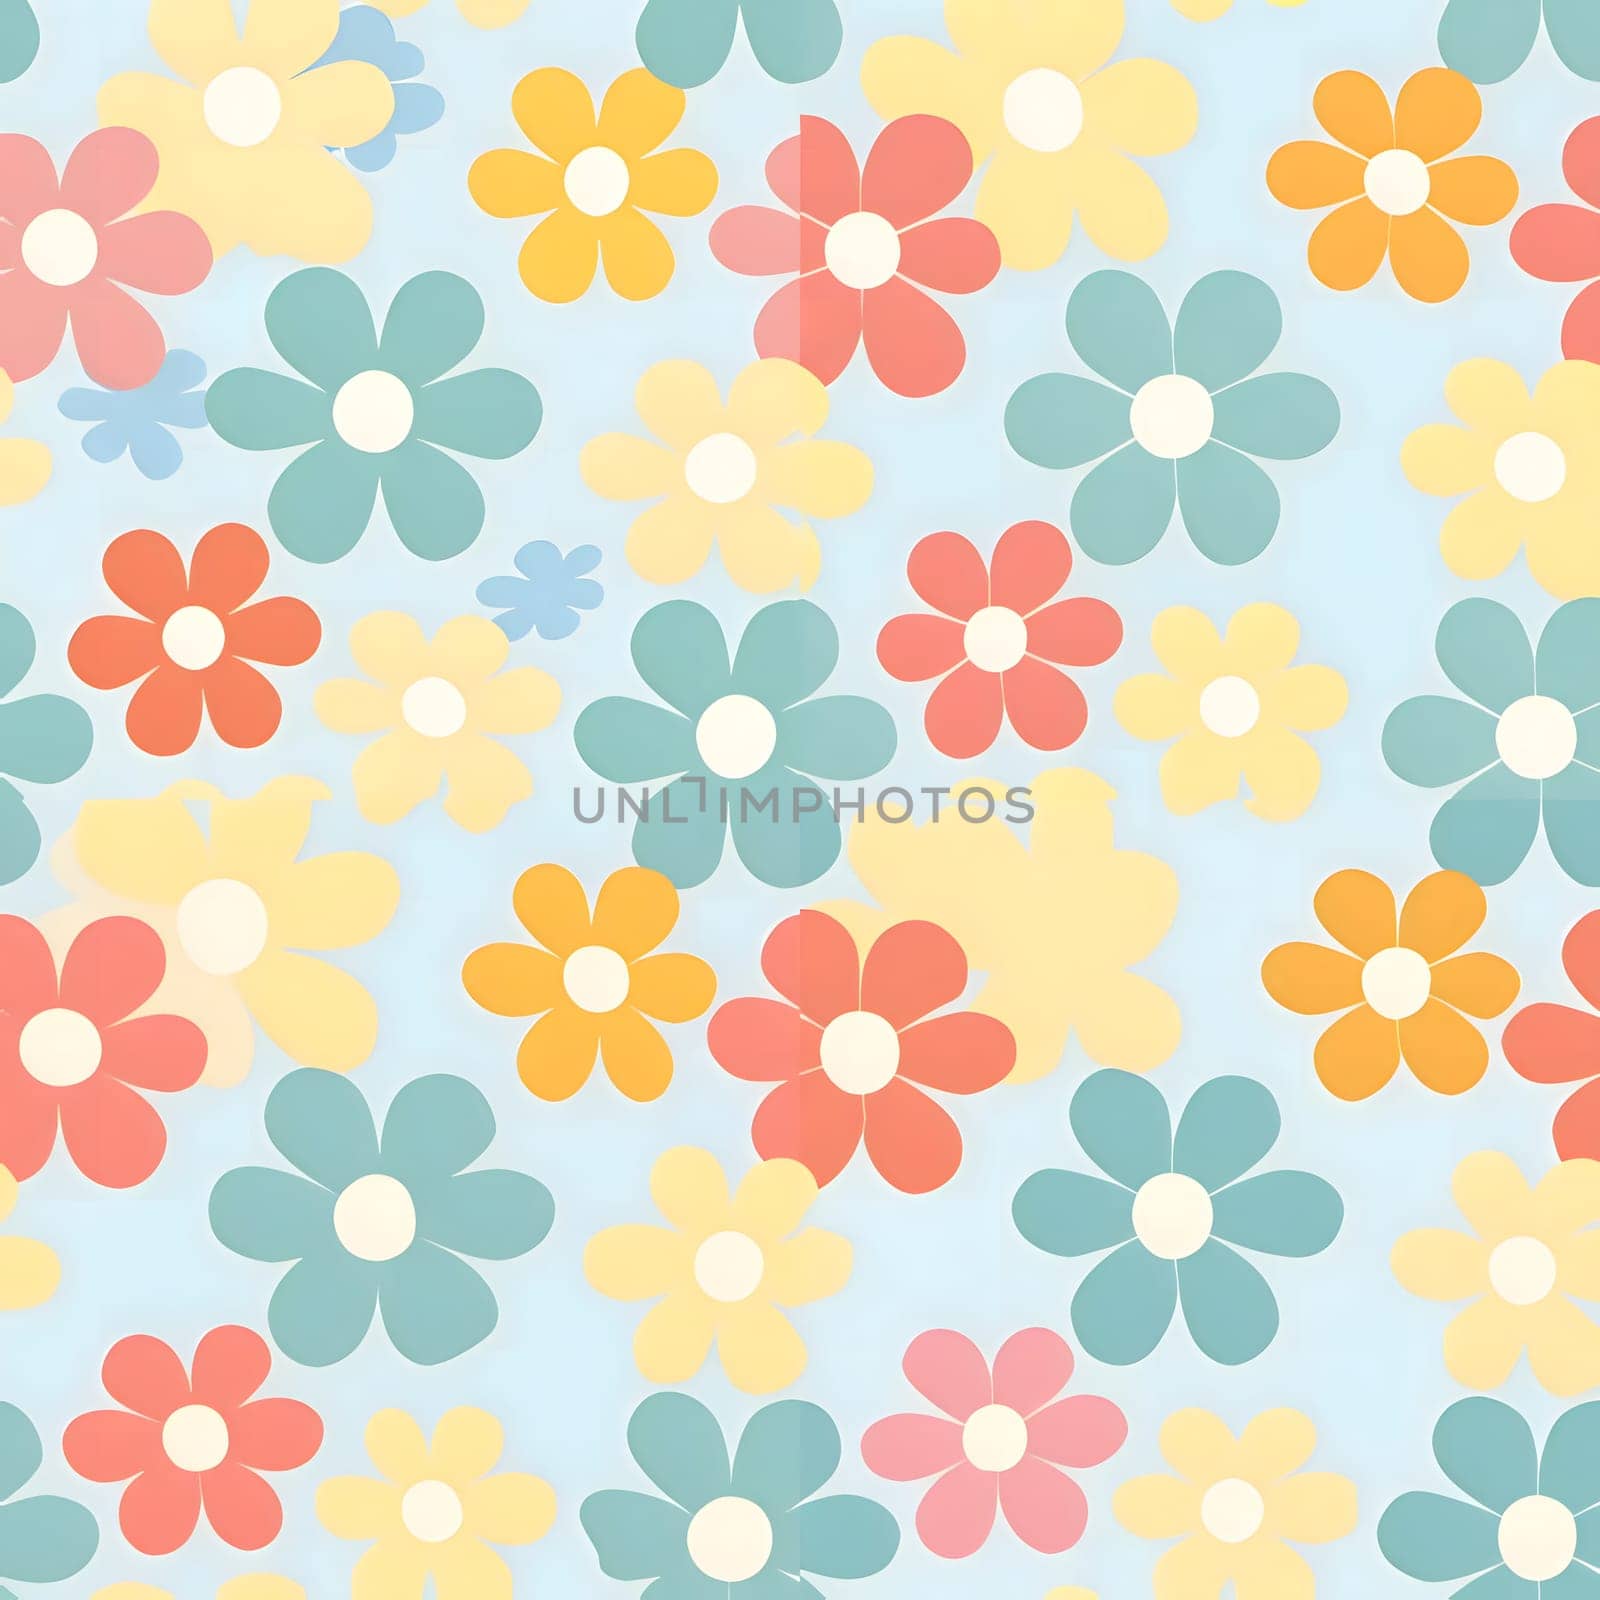 Patterns and banners backgrounds: Seamless pattern with flowers on blue background. Vector illustration.